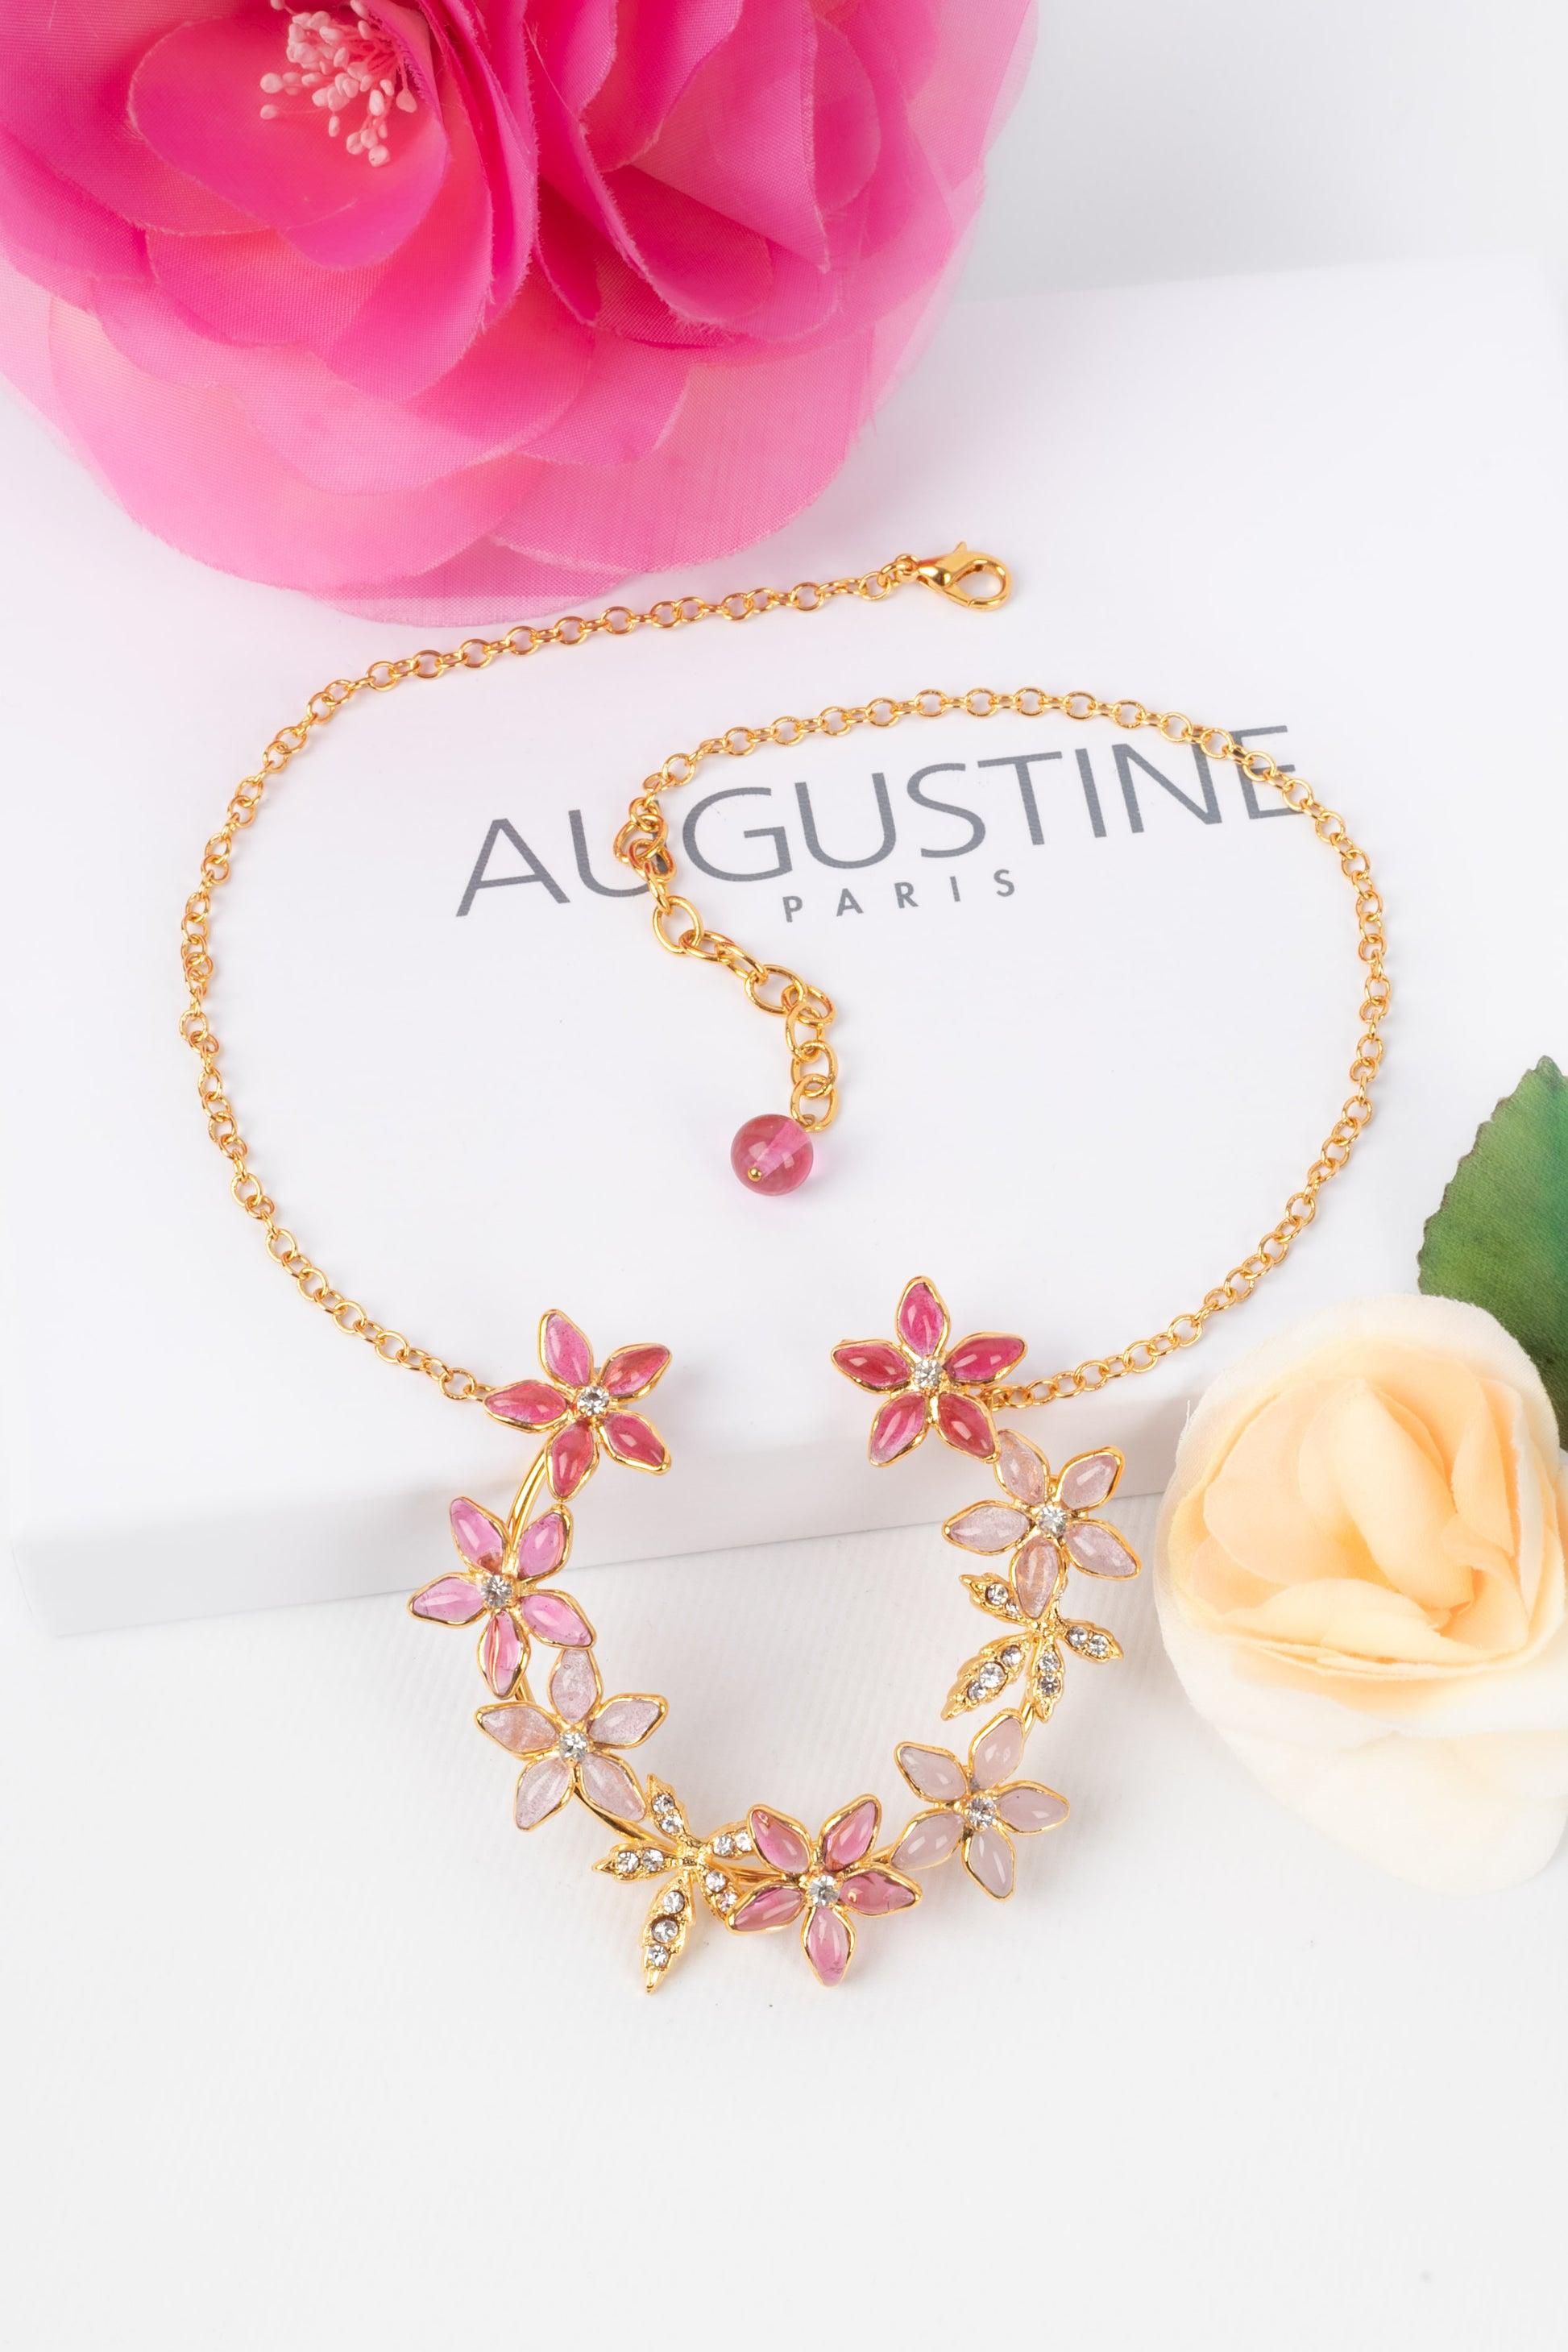 Augustine Golden Metal Necklace with Rhinestones and Glass Paste in Pink Tones For Sale 4